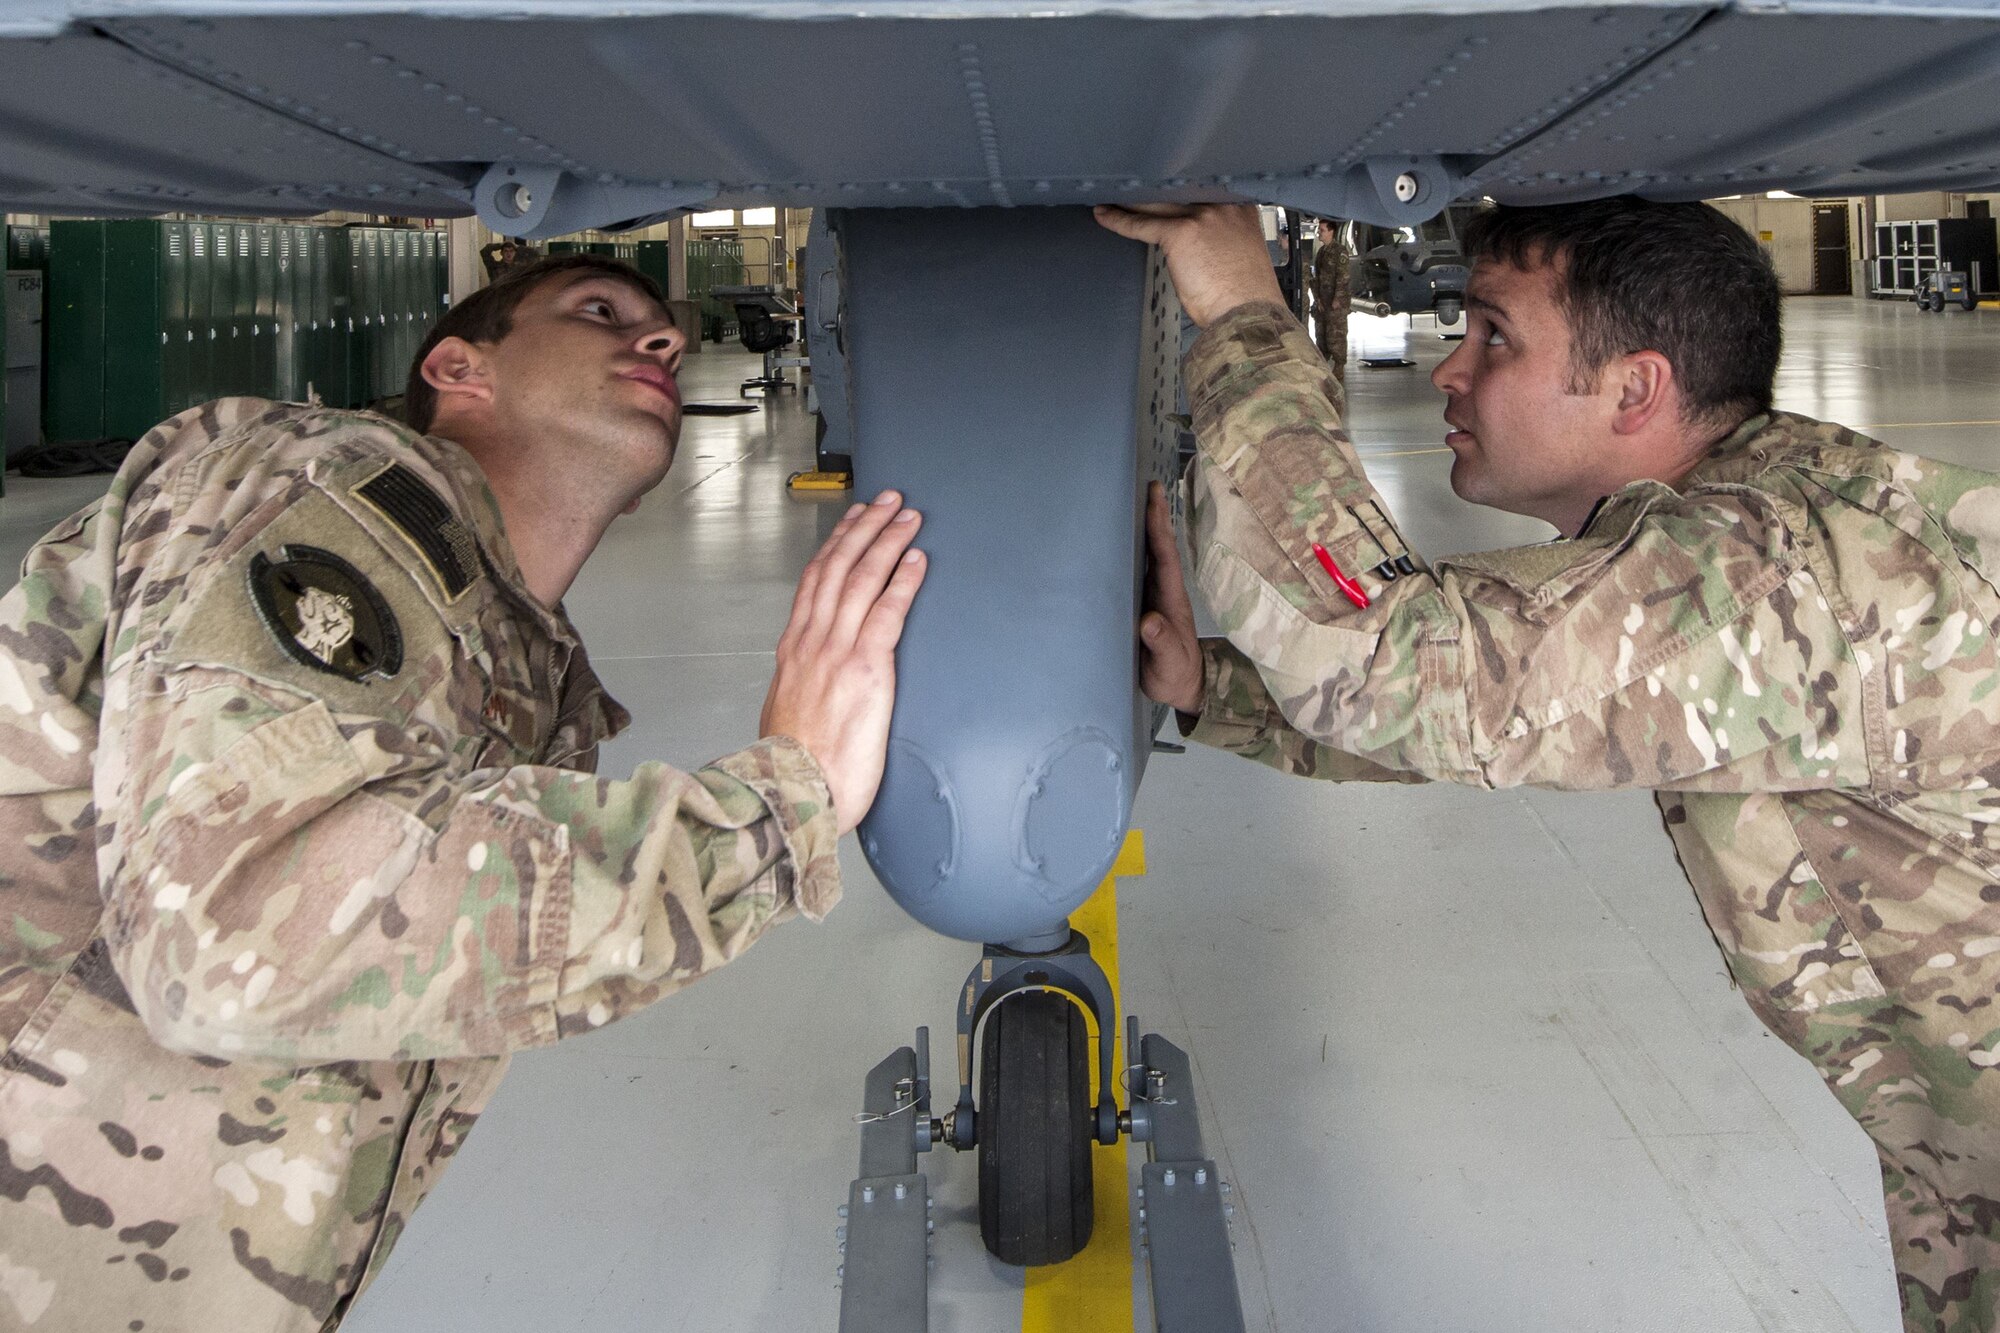 Senior Airman Joshua Herron, left, and Staff Sgt. Benjamin Taylor, both 723d Aircraft Maintenance Squadron HH-60G Pave Hawk crew chiefs, examine the horizontal stabilizer on an HH-60, Jan. 22, 2018, at Moody Air Force Base, Ga. From 16-25 Jan., Airmen from the 723d AMXS performed 216 hours of maintenance on an HH-60 after it returned to Moody following 350 days of depot maintenance at Naval Air Station (NAS) Jacksonville. While at NAS Jacksonville, the HH-60 underwent a complete structural overhaul where it received new internal and external components along with repairs and updated programming. (U.S. Air Force photo by Airman Eugene Oliver)